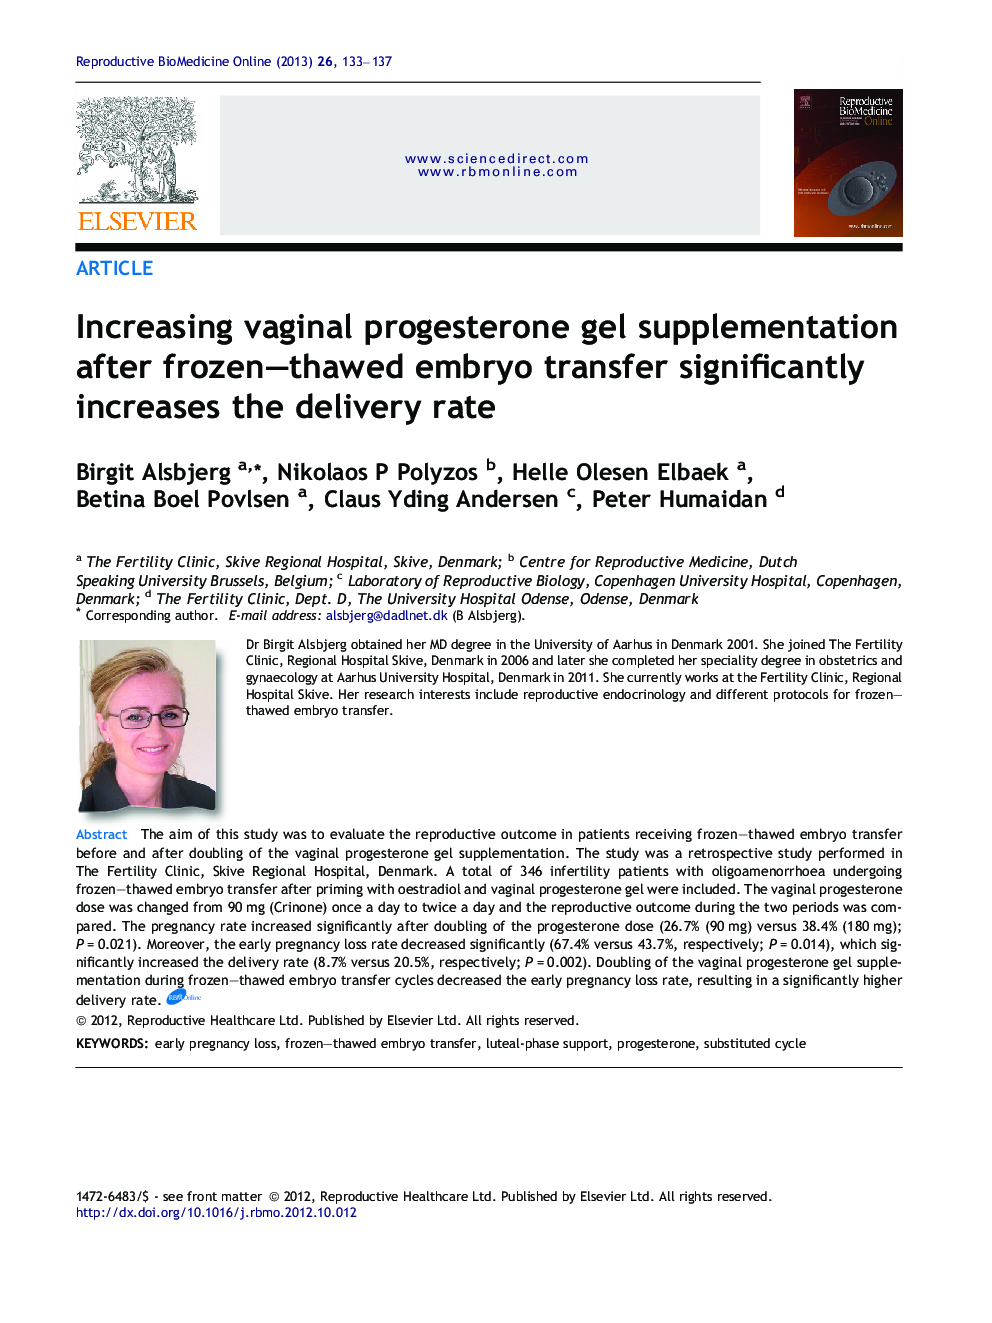 Increasing vaginal progesterone gel supplementation after frozen–thawed embryo transfer significantly increases the delivery rate 